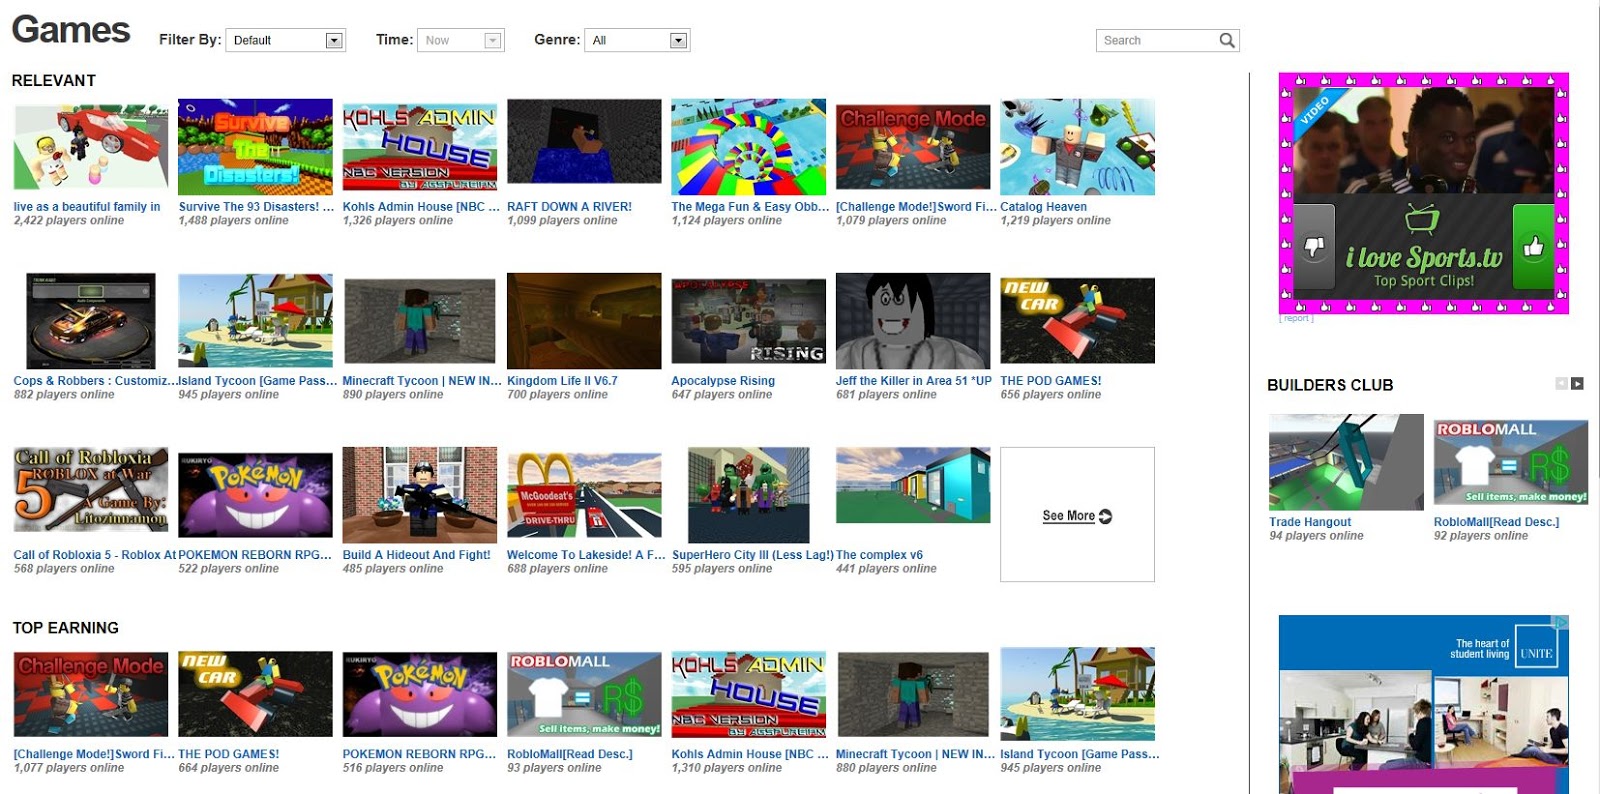 Unofficial Roblox Roblox Games Page Massive Layout Update New Look 2013 - roblox games complex